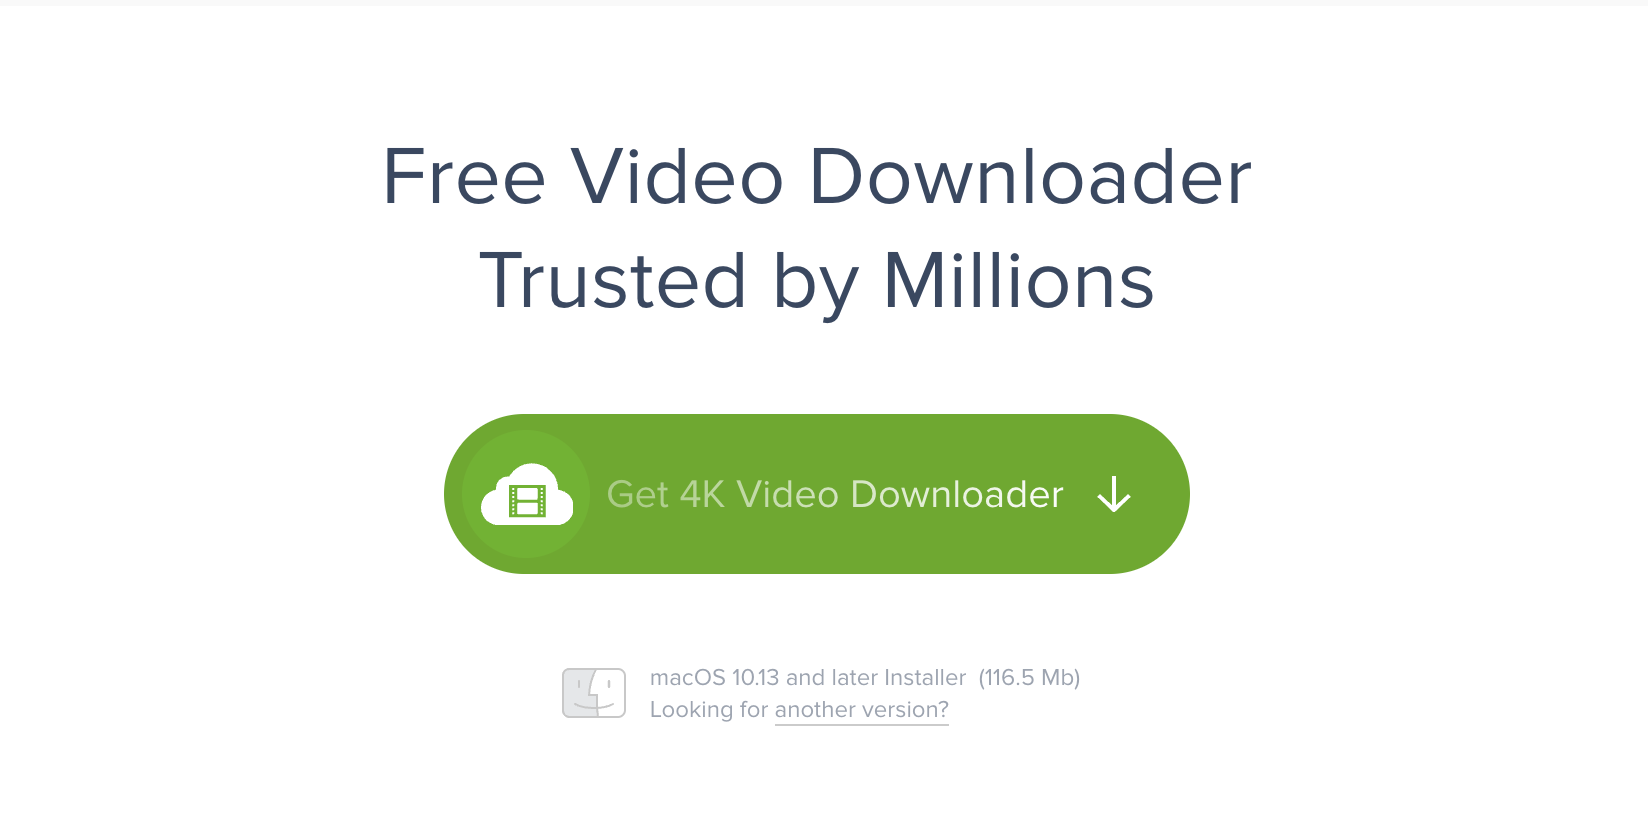 The best Dailymotion video software